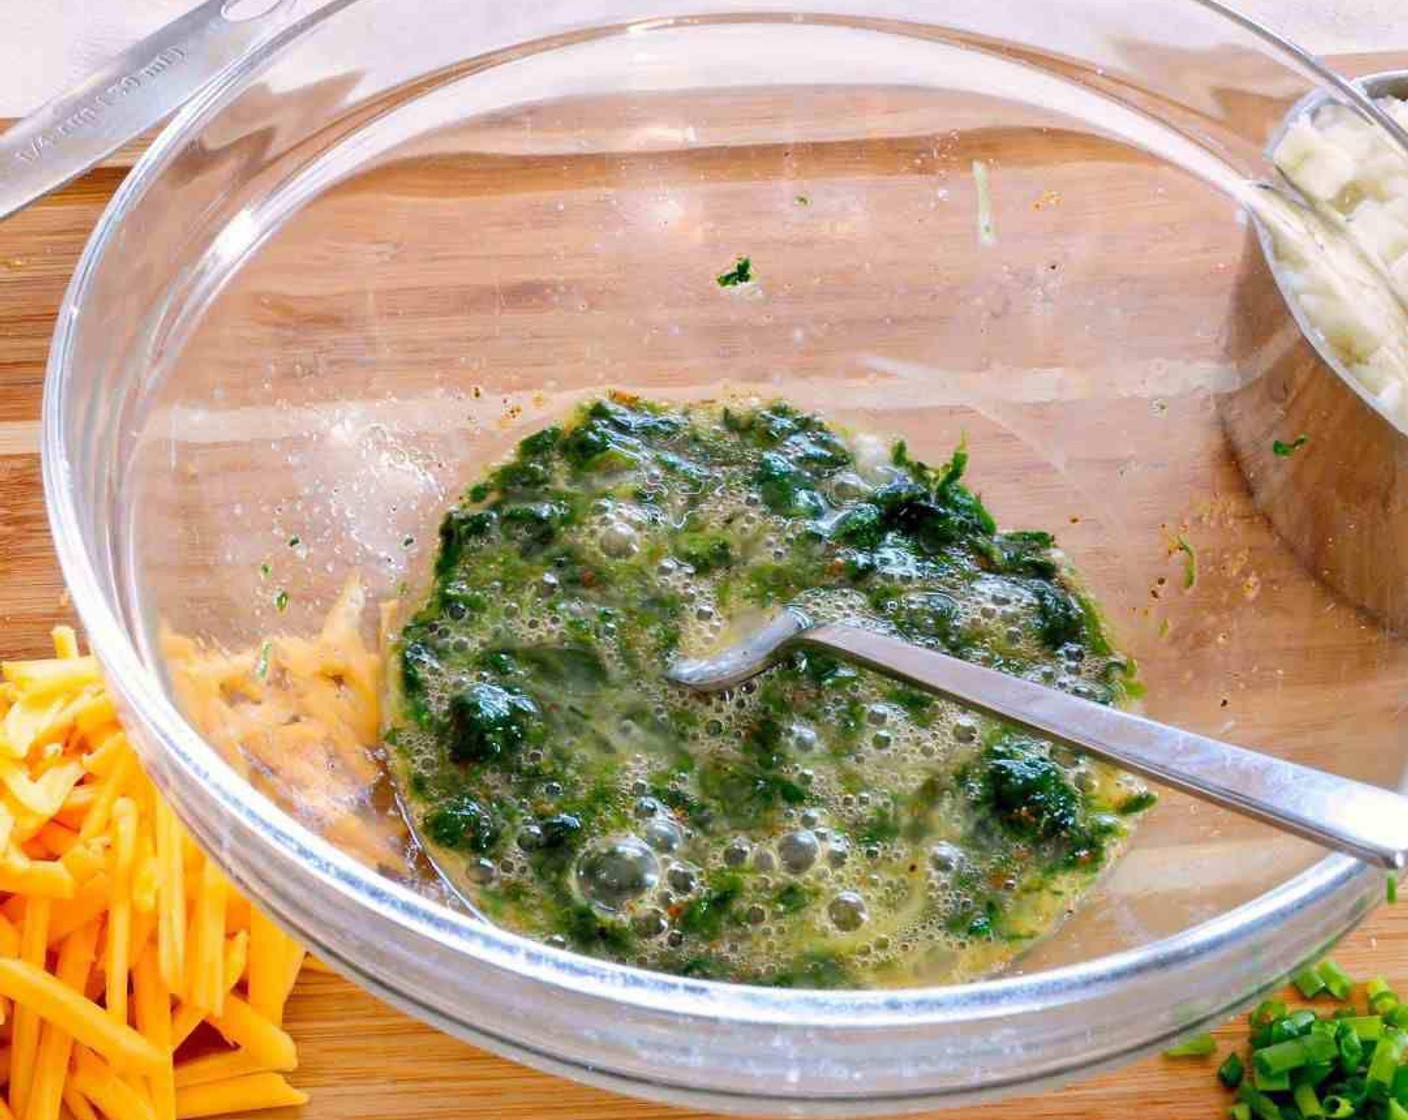 step 1 In a medium bowl, mix together Egg (1), Frozen Spinach (1/3 cup), Seasoned Salt (1/4 tsp), Onion Powder (1/8 tsp), and Ground Black Pepper (1/8 tsp).